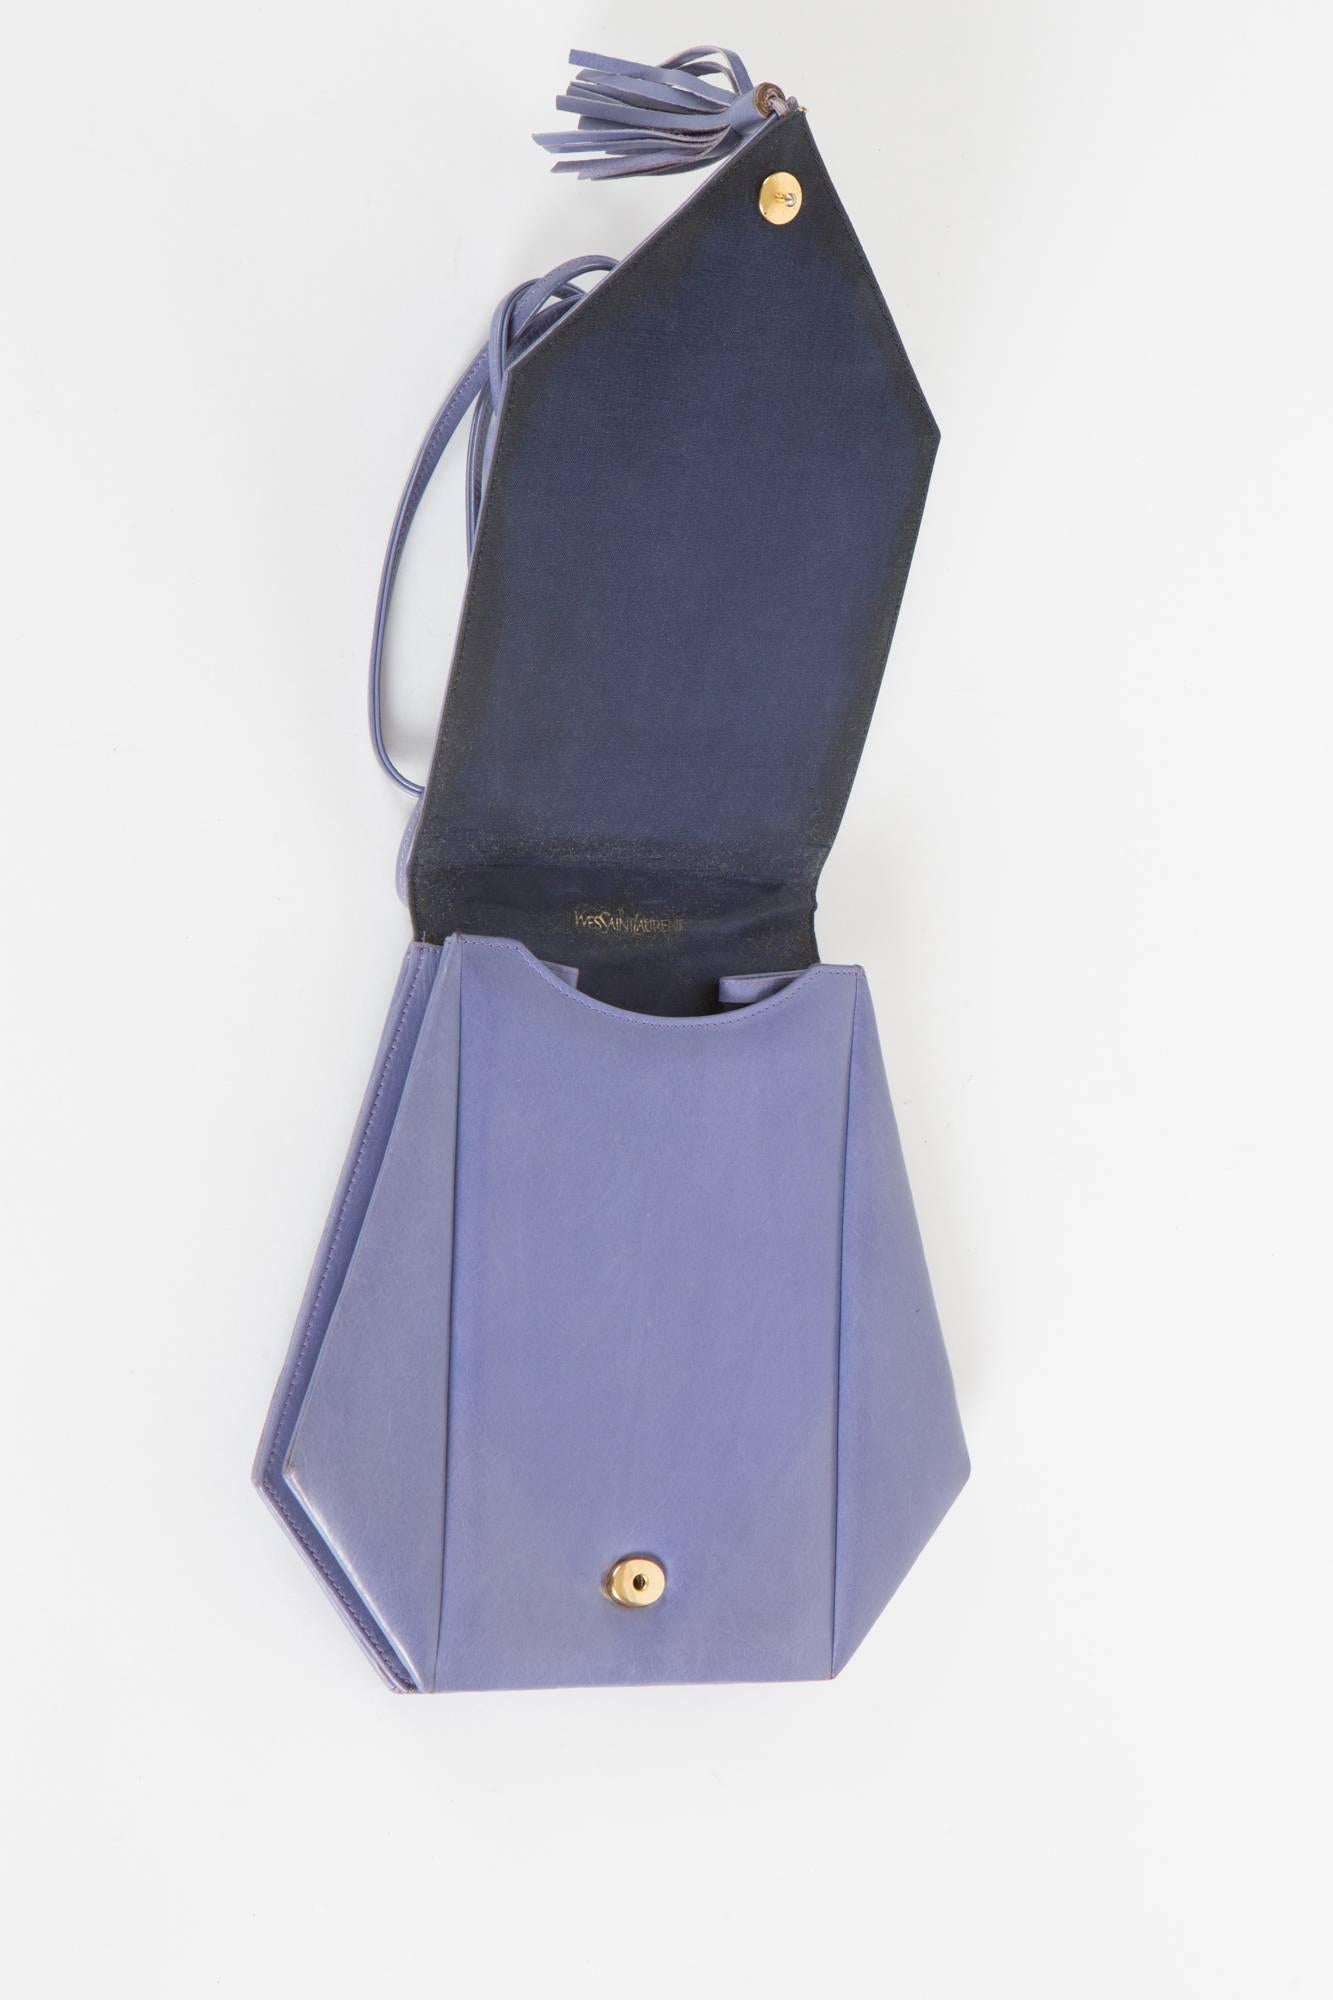 Yves Saint Laurent Opera Ballets Russes collection 1976 lilac lamb leather shoulder purse featuring an irregular hexagon shaped, a long strap total length: 109 cm (43 in.).
Full hight approx : 19cm (7,4in)
Full width at the largest approx :20cm